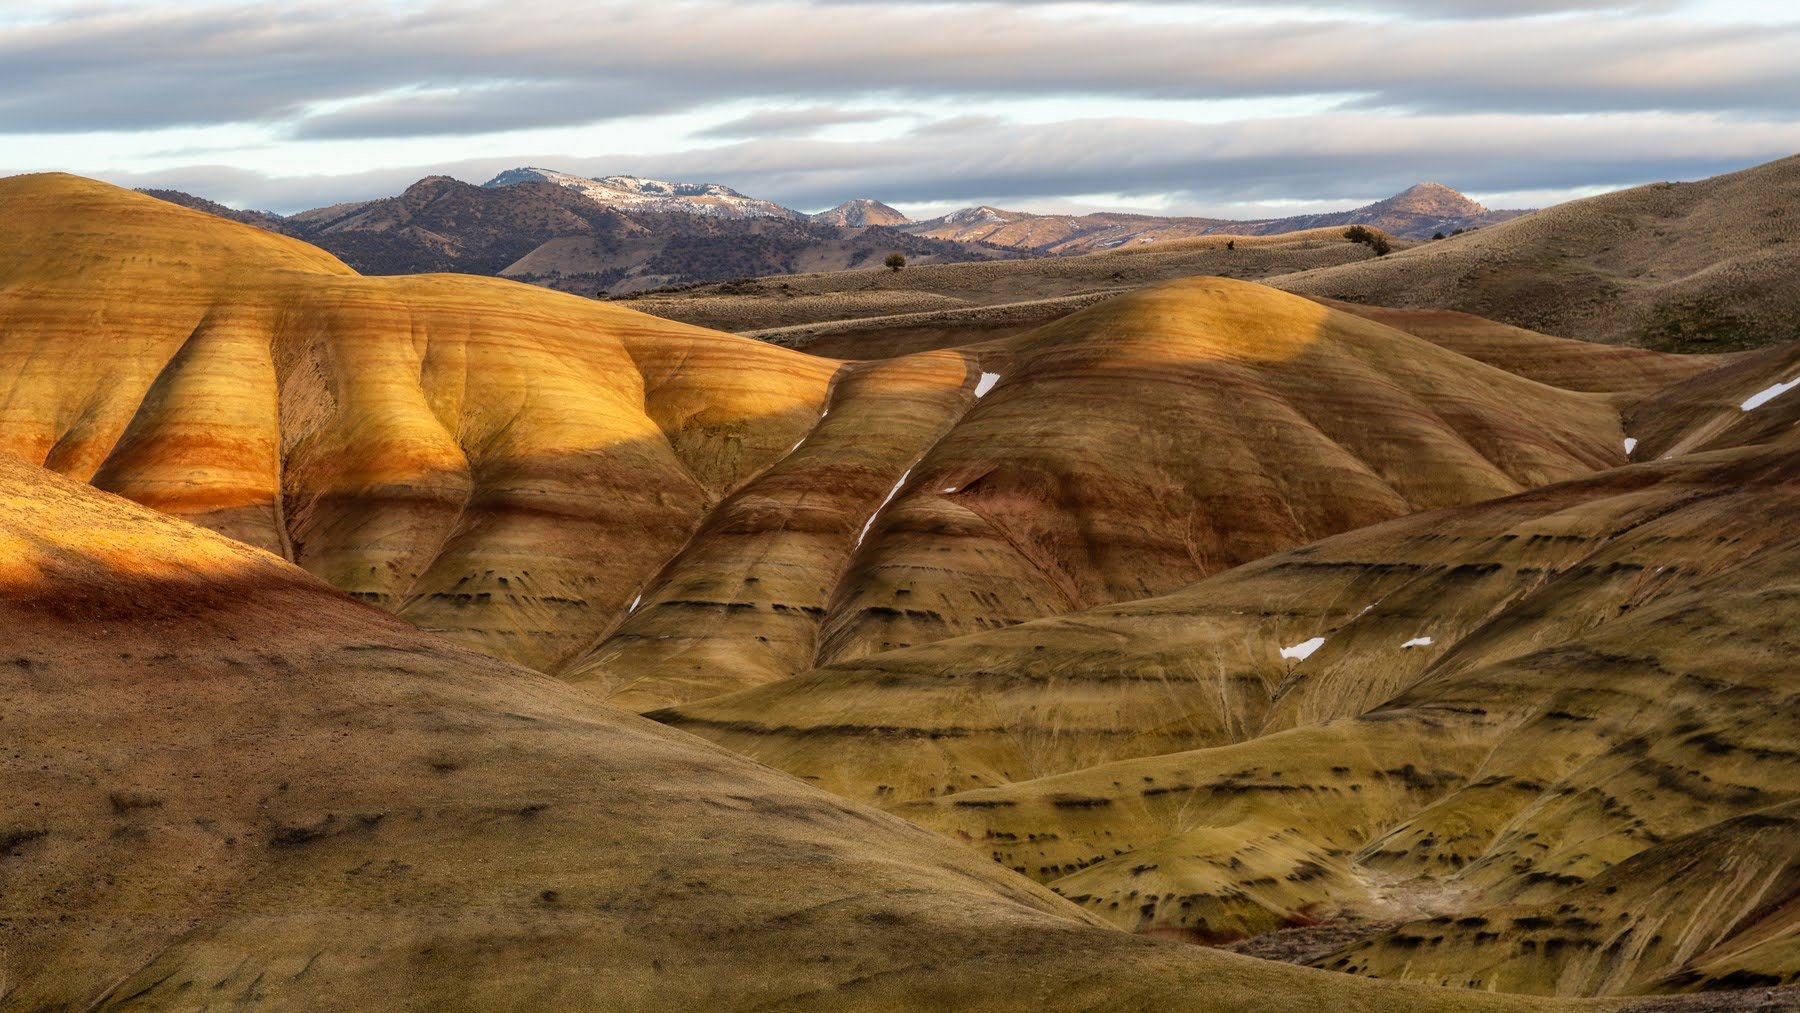 John Day Fossil Beds Painted Hills Unit in Oregon during sunset.